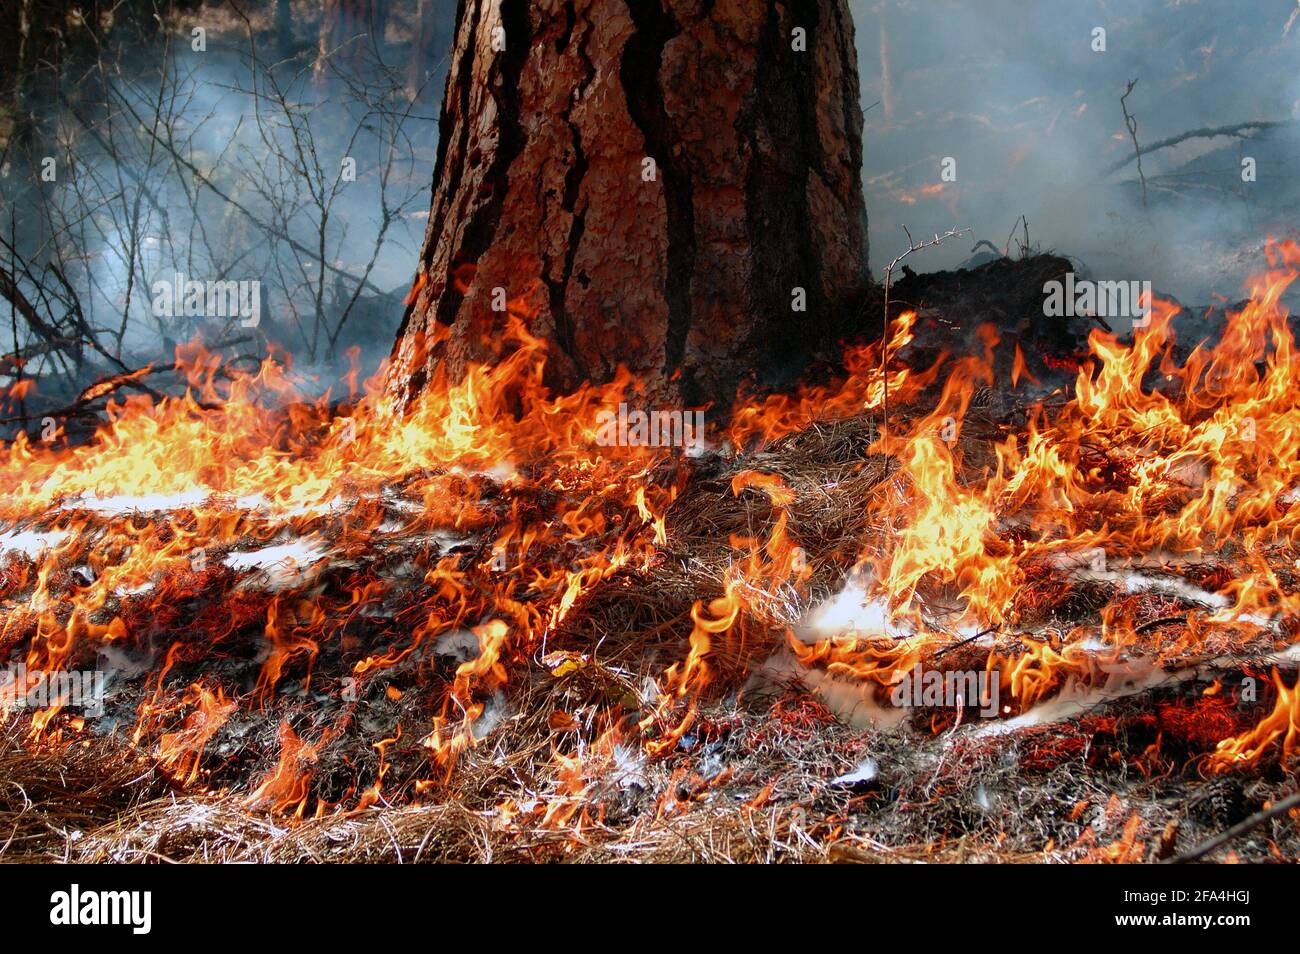 Prescribed fire in an old-growth ponderosa pine forest. Kootenai National Forest near Libby, northwest Montana. (Photo by Randy Beacham) Stock Photo